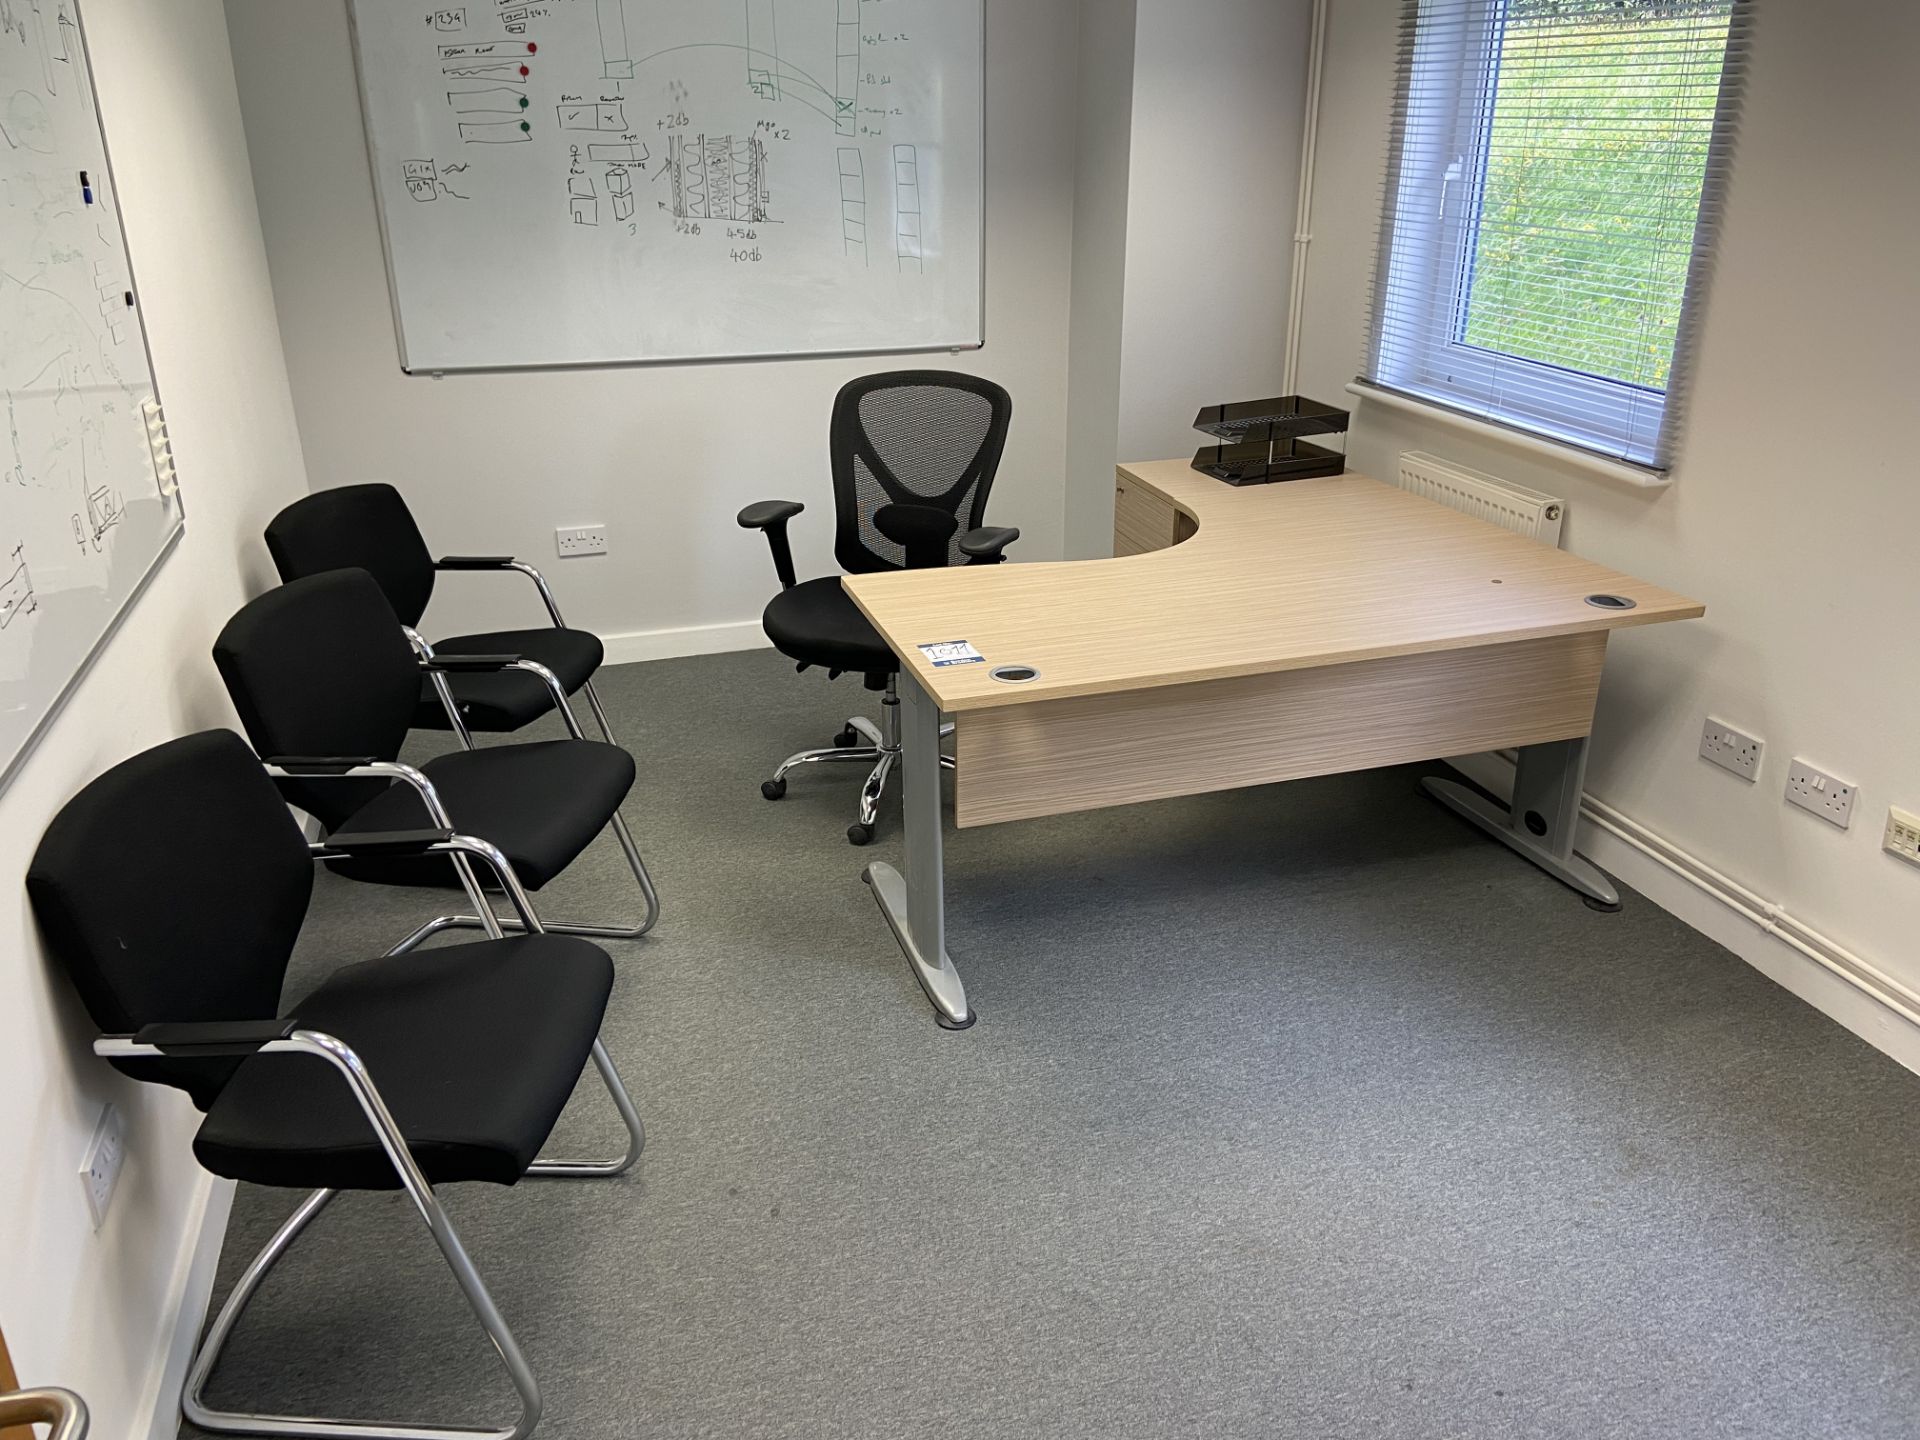 Lot comprisng: one corner desk, one 3 drawer high pedestal, one office chair, 3 meeting room